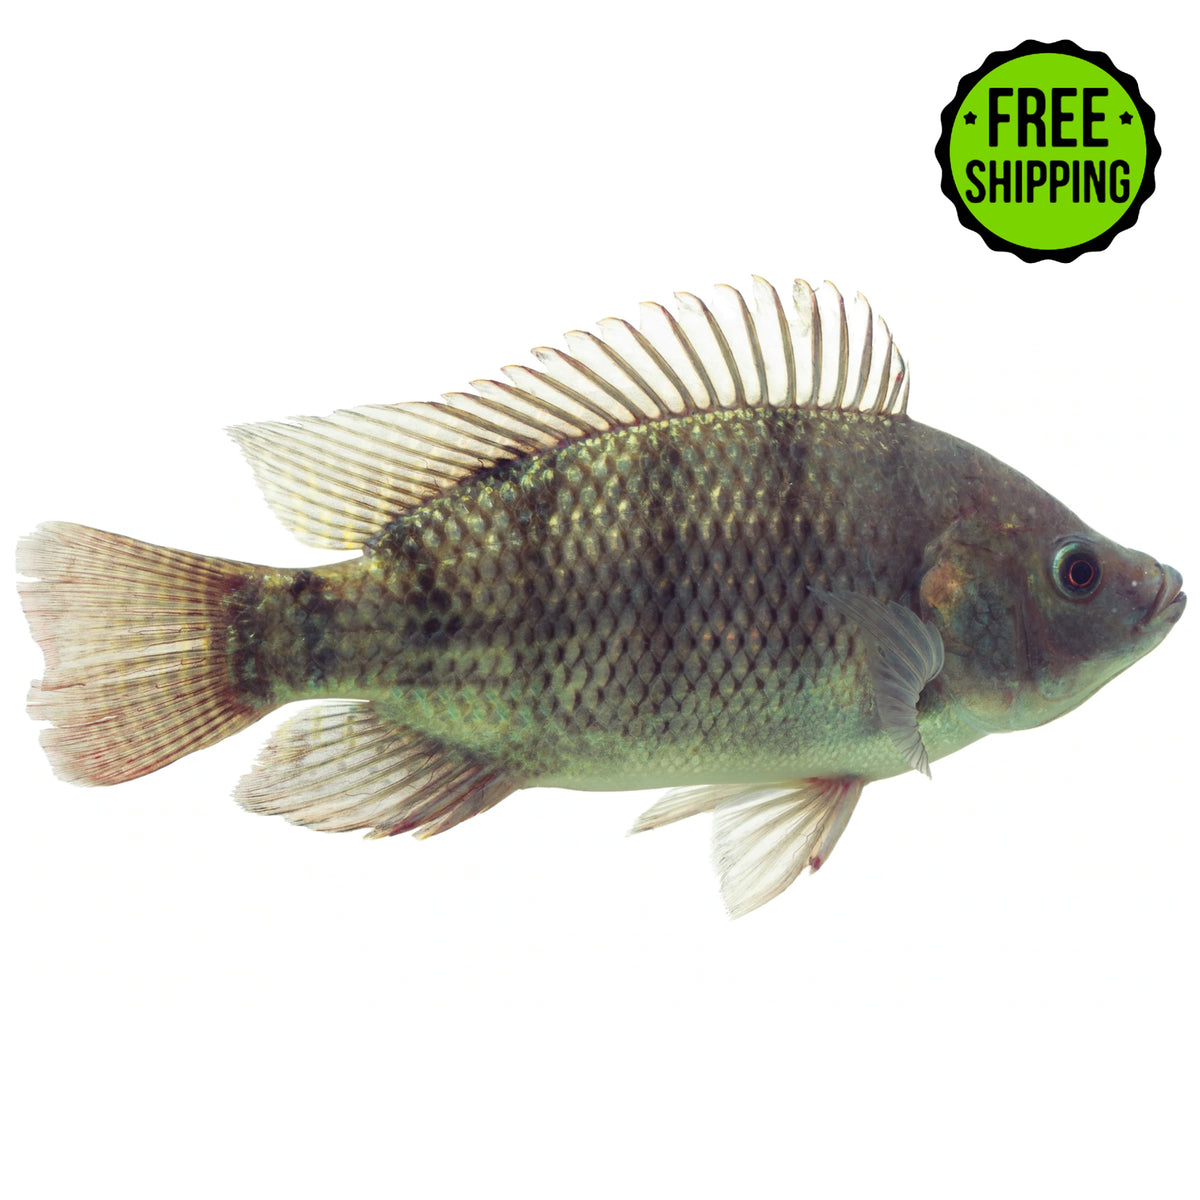 A live Black Mozambique Tilapia Fingerlings available for shipping with free delivery on a white background.